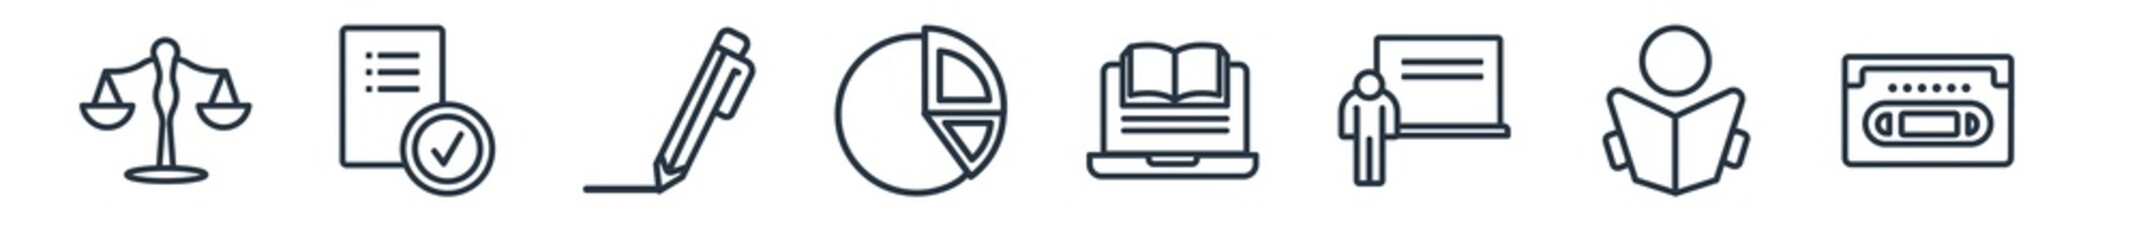 linear set of education outline icons. line vector icons such as law, check list, pen, pie chart, ebook, old school vector illustration.